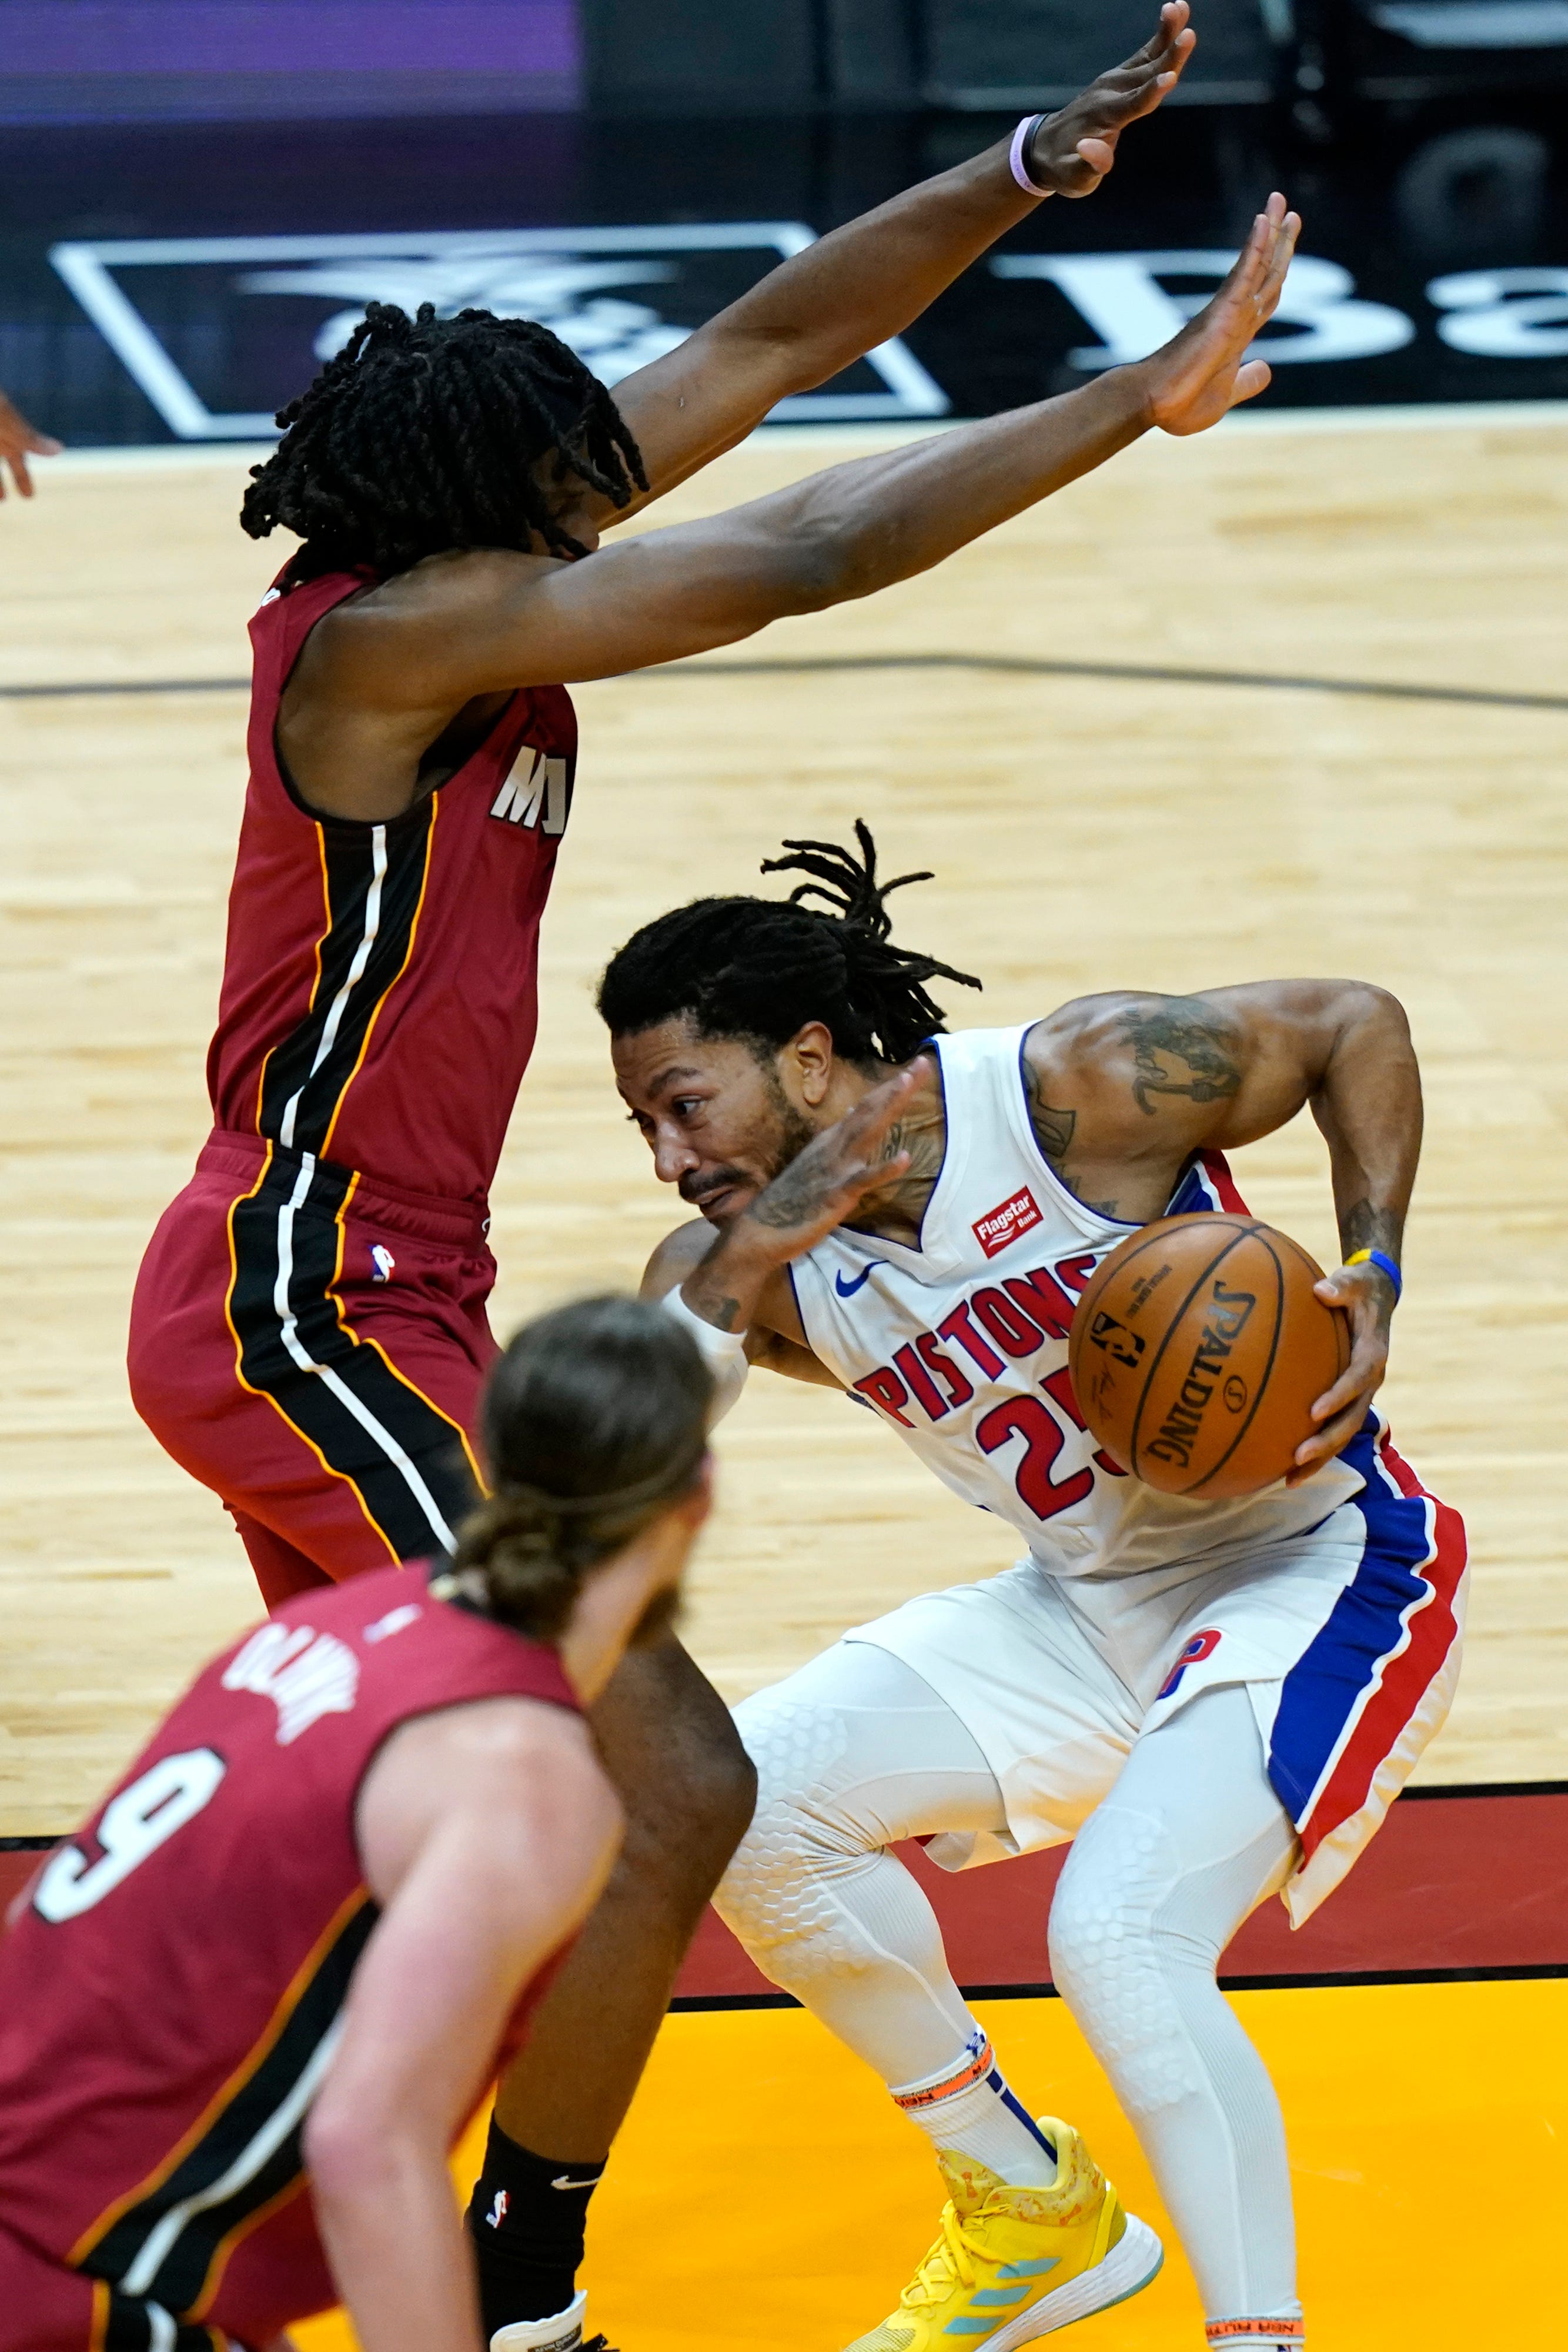 Detroit Pistons guard Derrick Rose, right, drives to the basket as Miami Heat forward KZ Okpala defends during the first half.